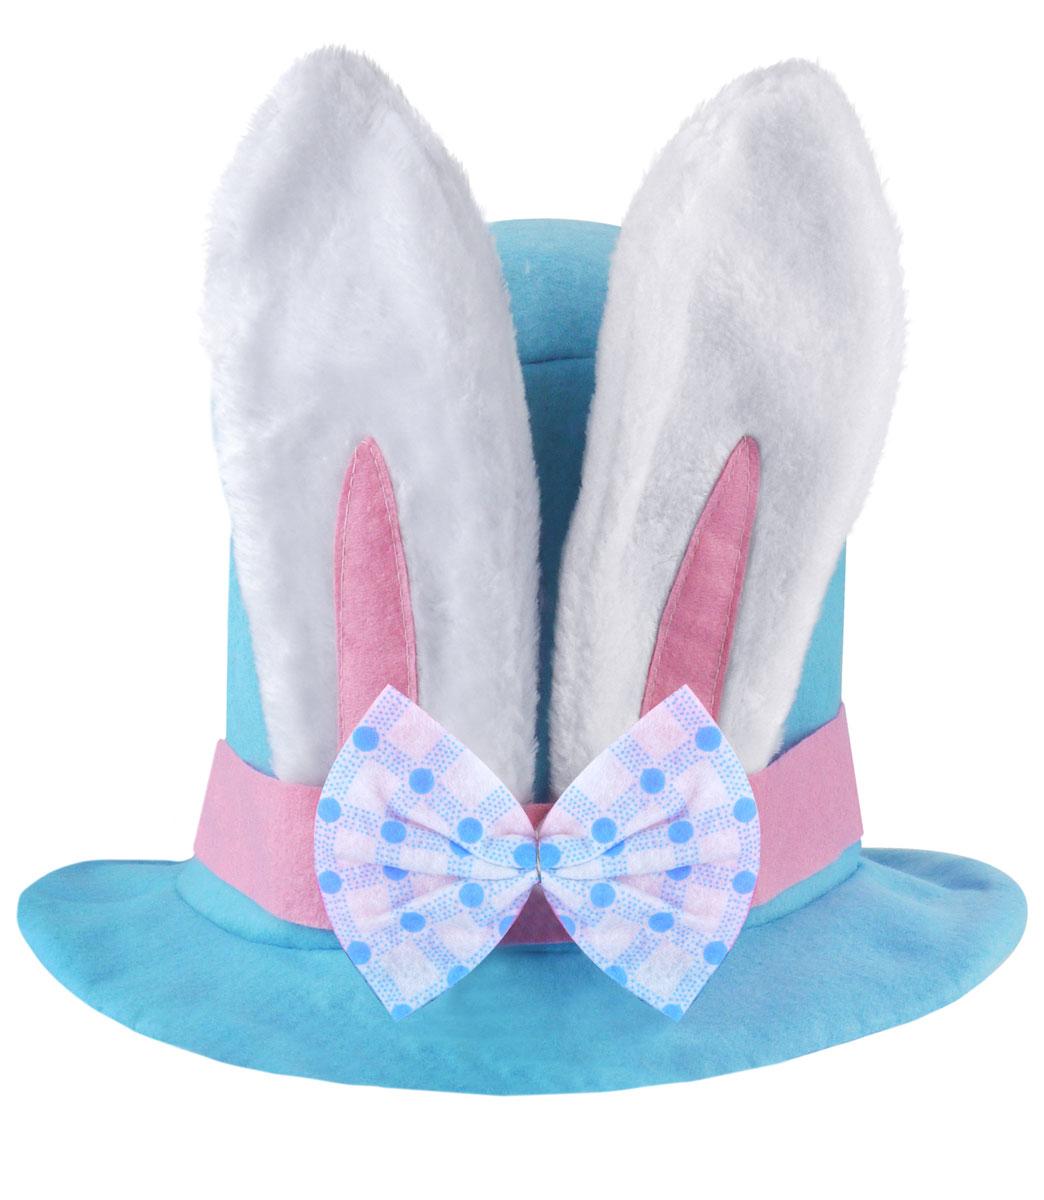 Children's Easter Bunny Hat with Ears by Henbrandt E21196 available here at Karnival Costumes online party shop